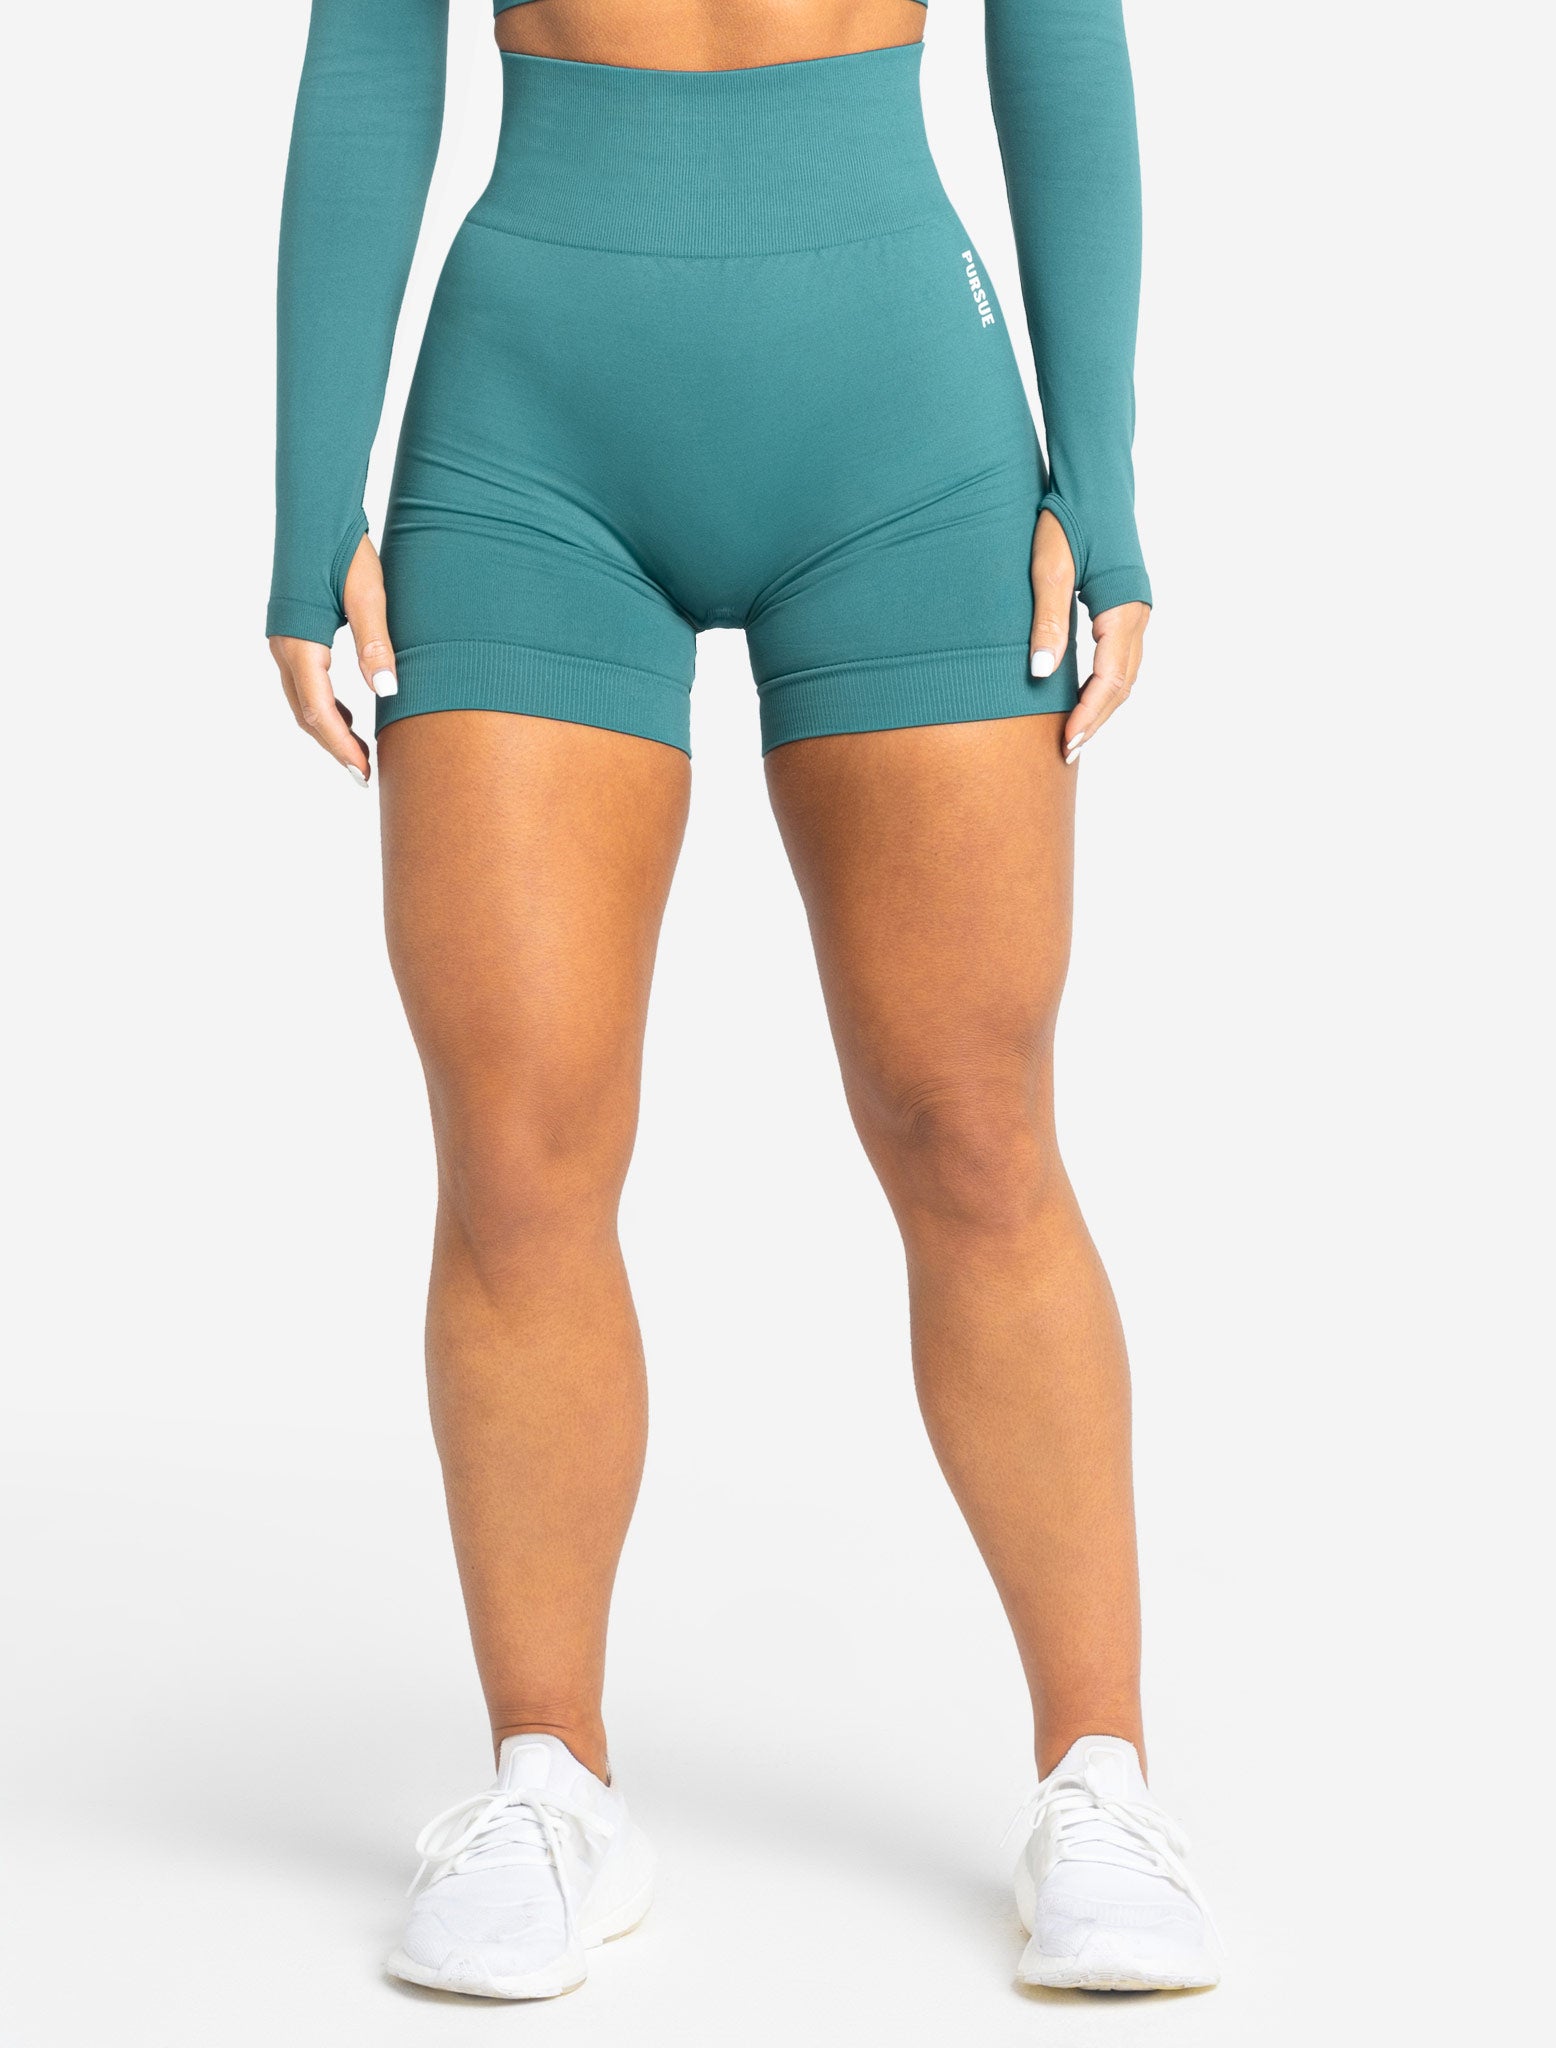 Move Seamless Shorts / Teal Pursue Fitness 2